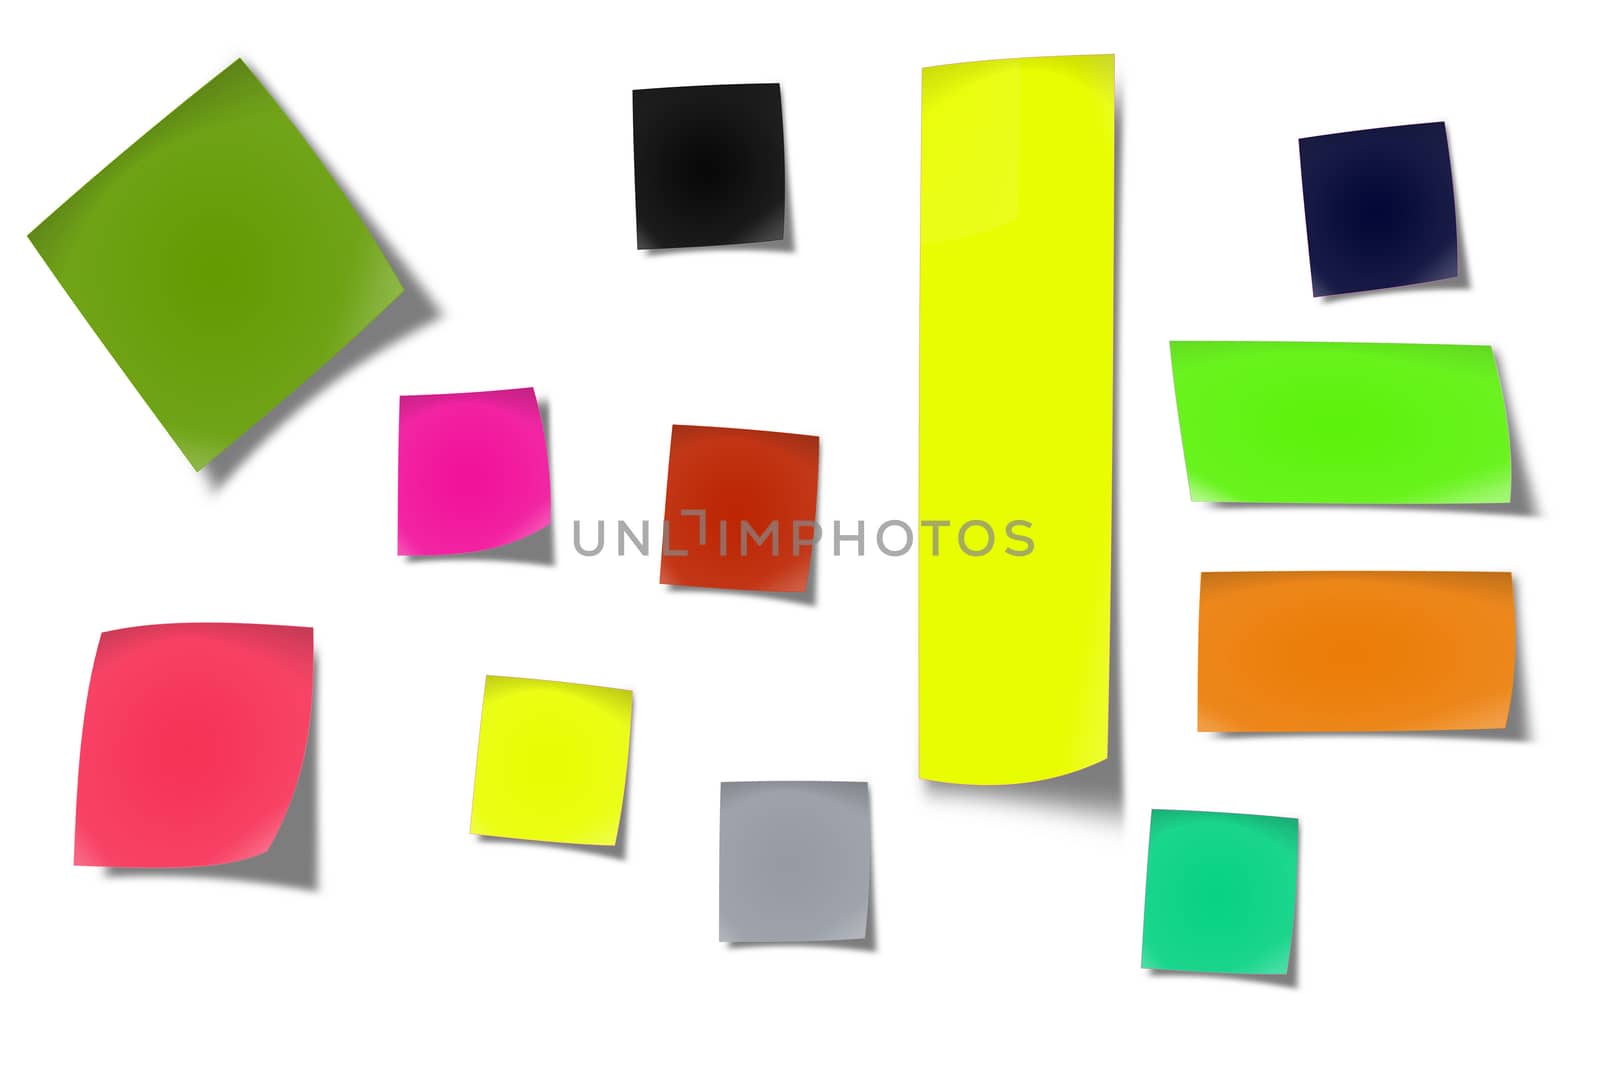 Sticker notes isolated on the white background